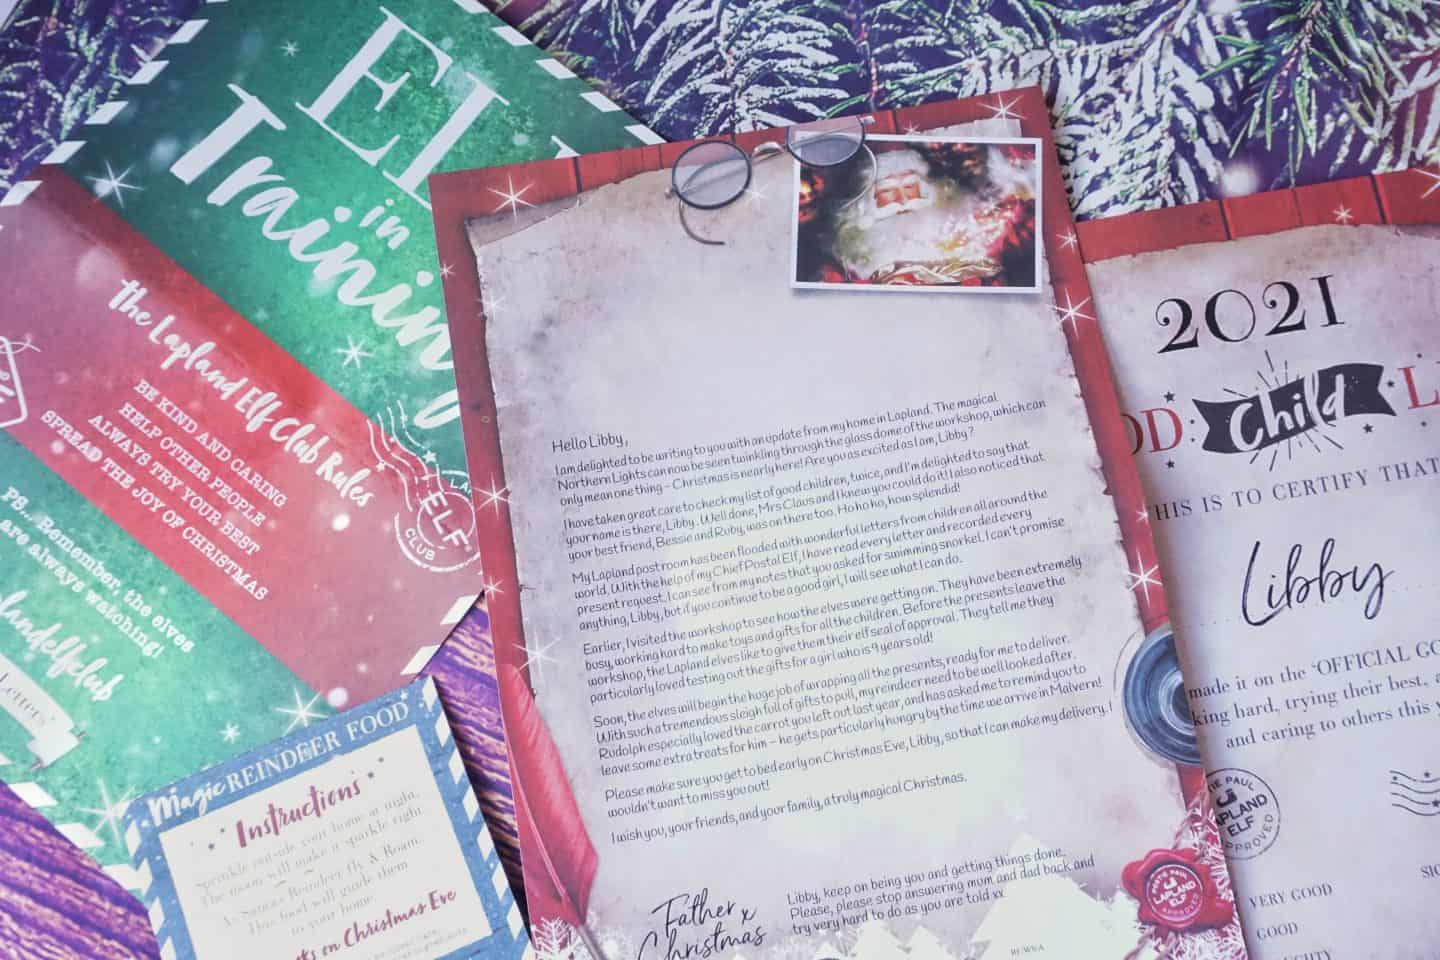 Letter from Santa addressed to Libby displayed with other Lapland Letters papers